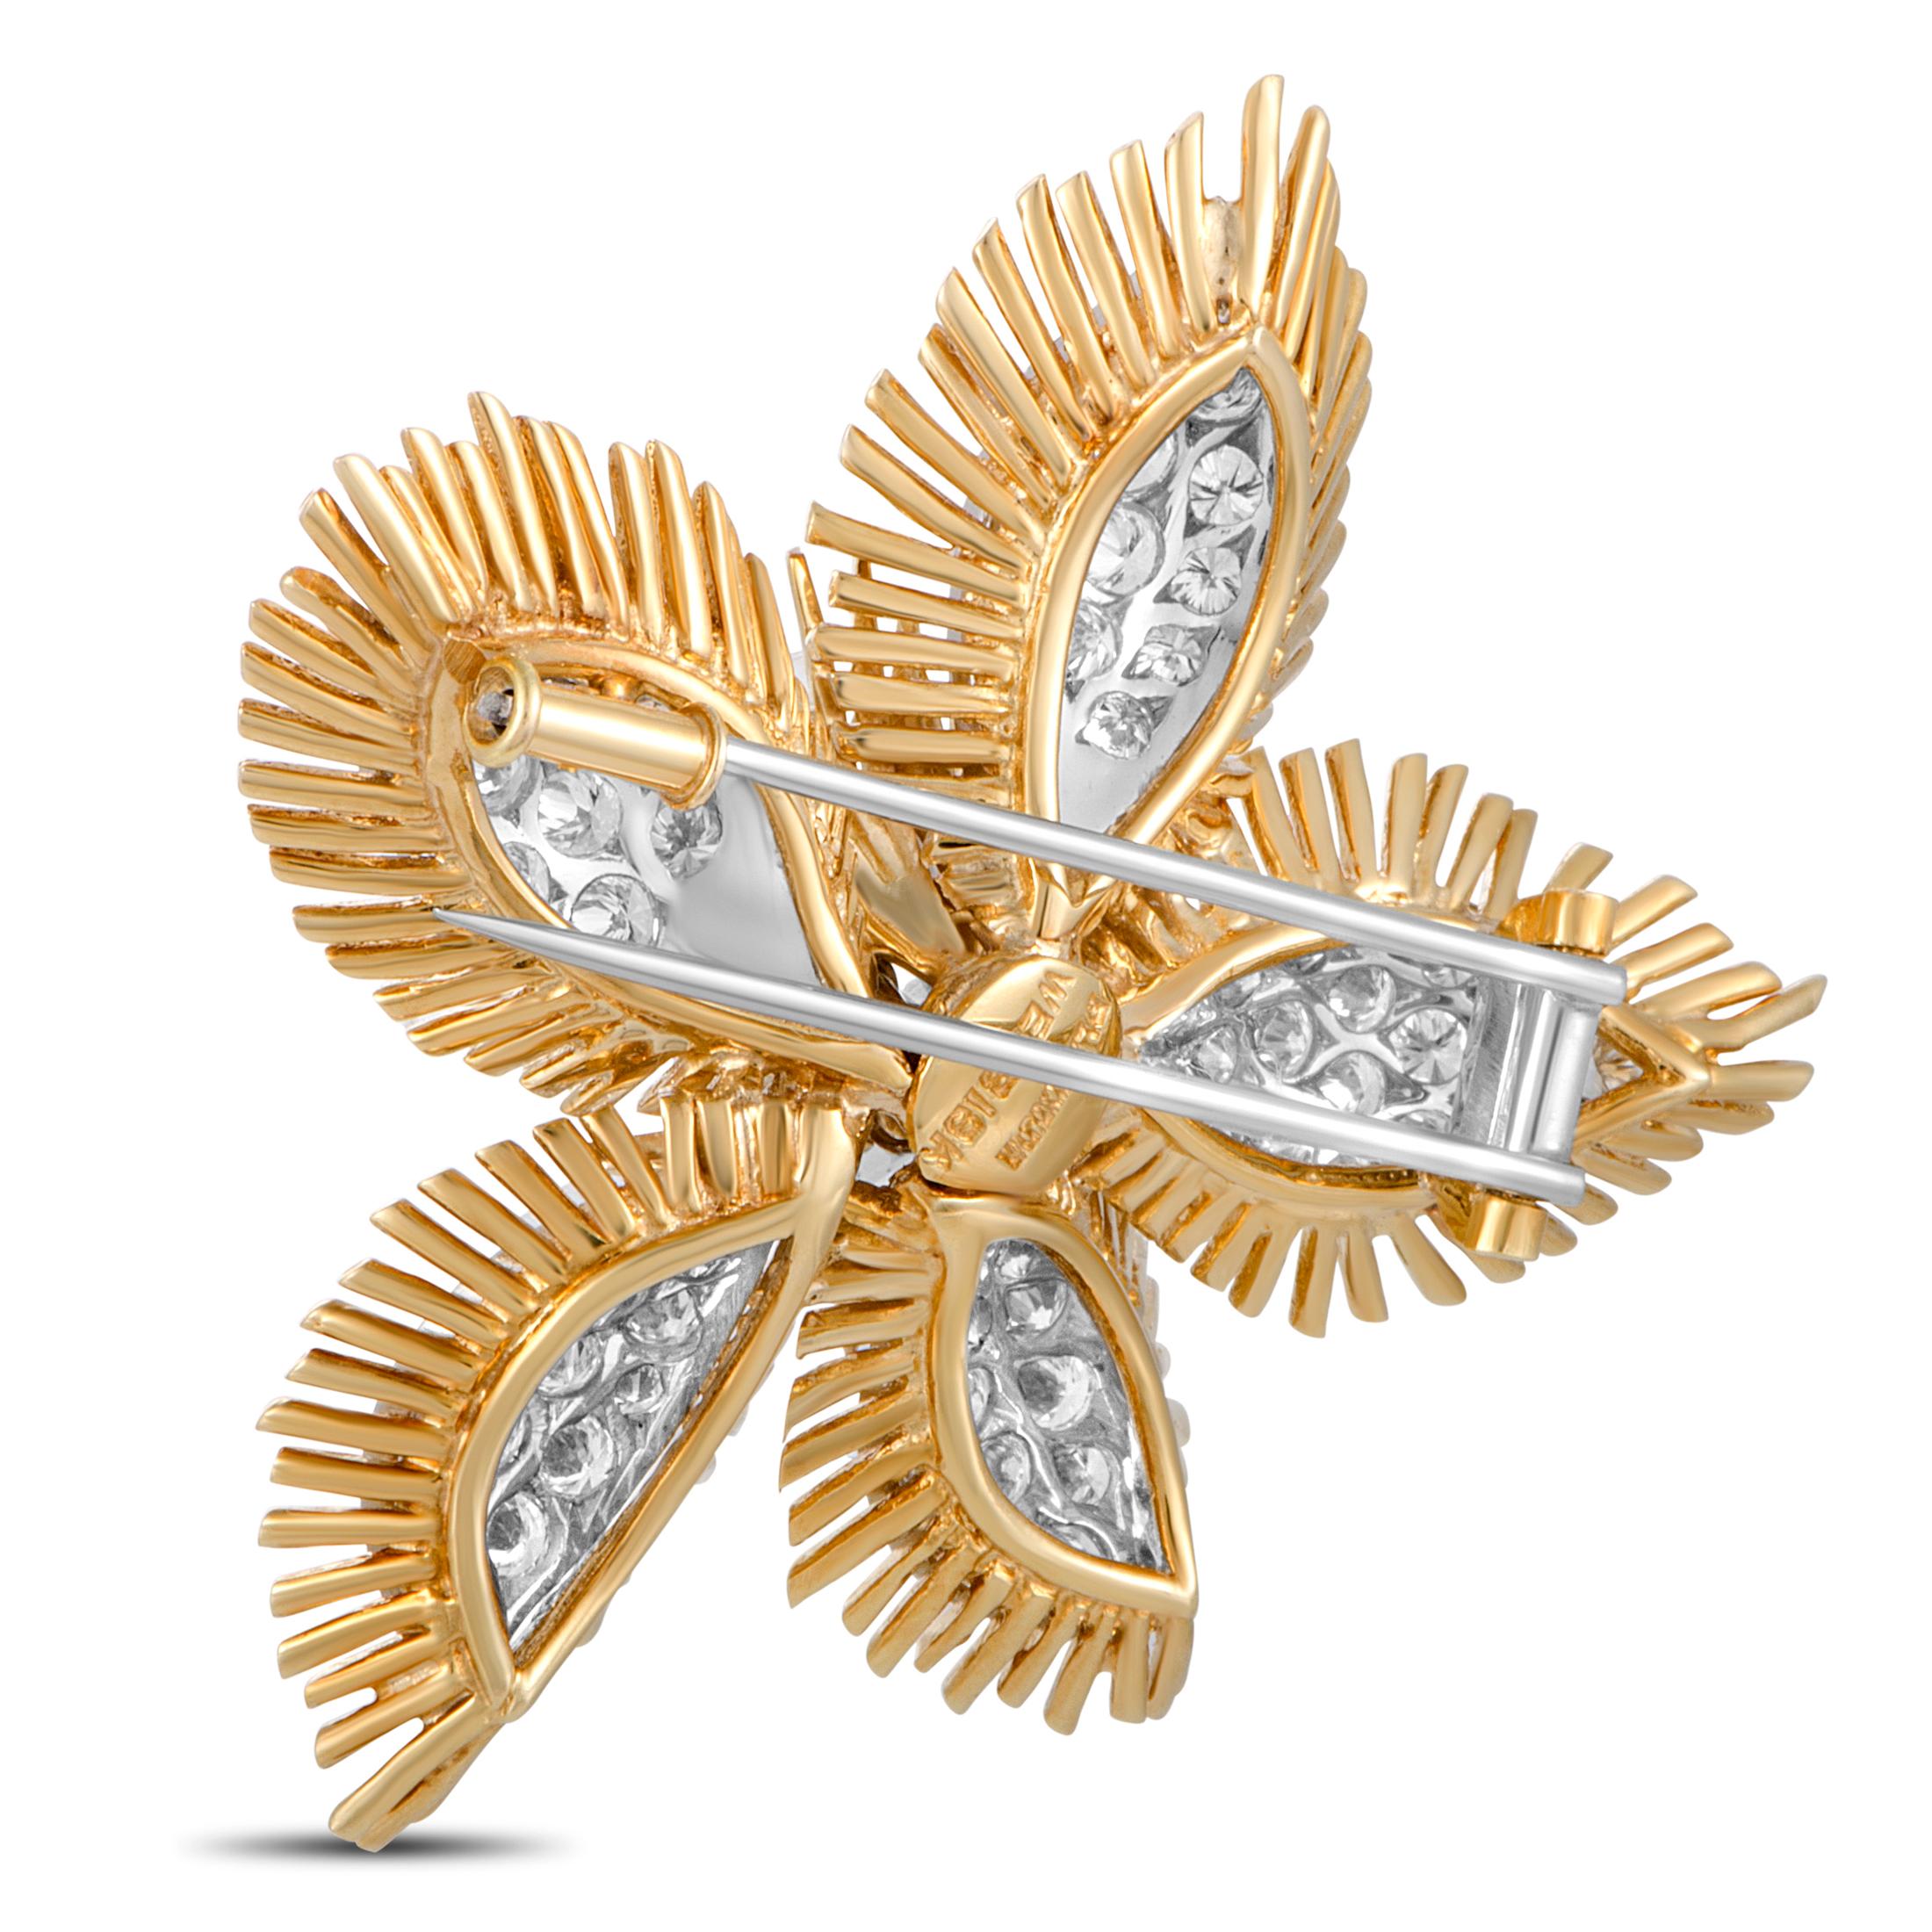 This David Webb brooch is made of 18K yellow gold and platinum and set with a total of 8.00 carats of diamonds that boast grade F color and VS1 clarity. The brooch weighs 31.2 grams and measures 2.00” in length and 2.00” in width.